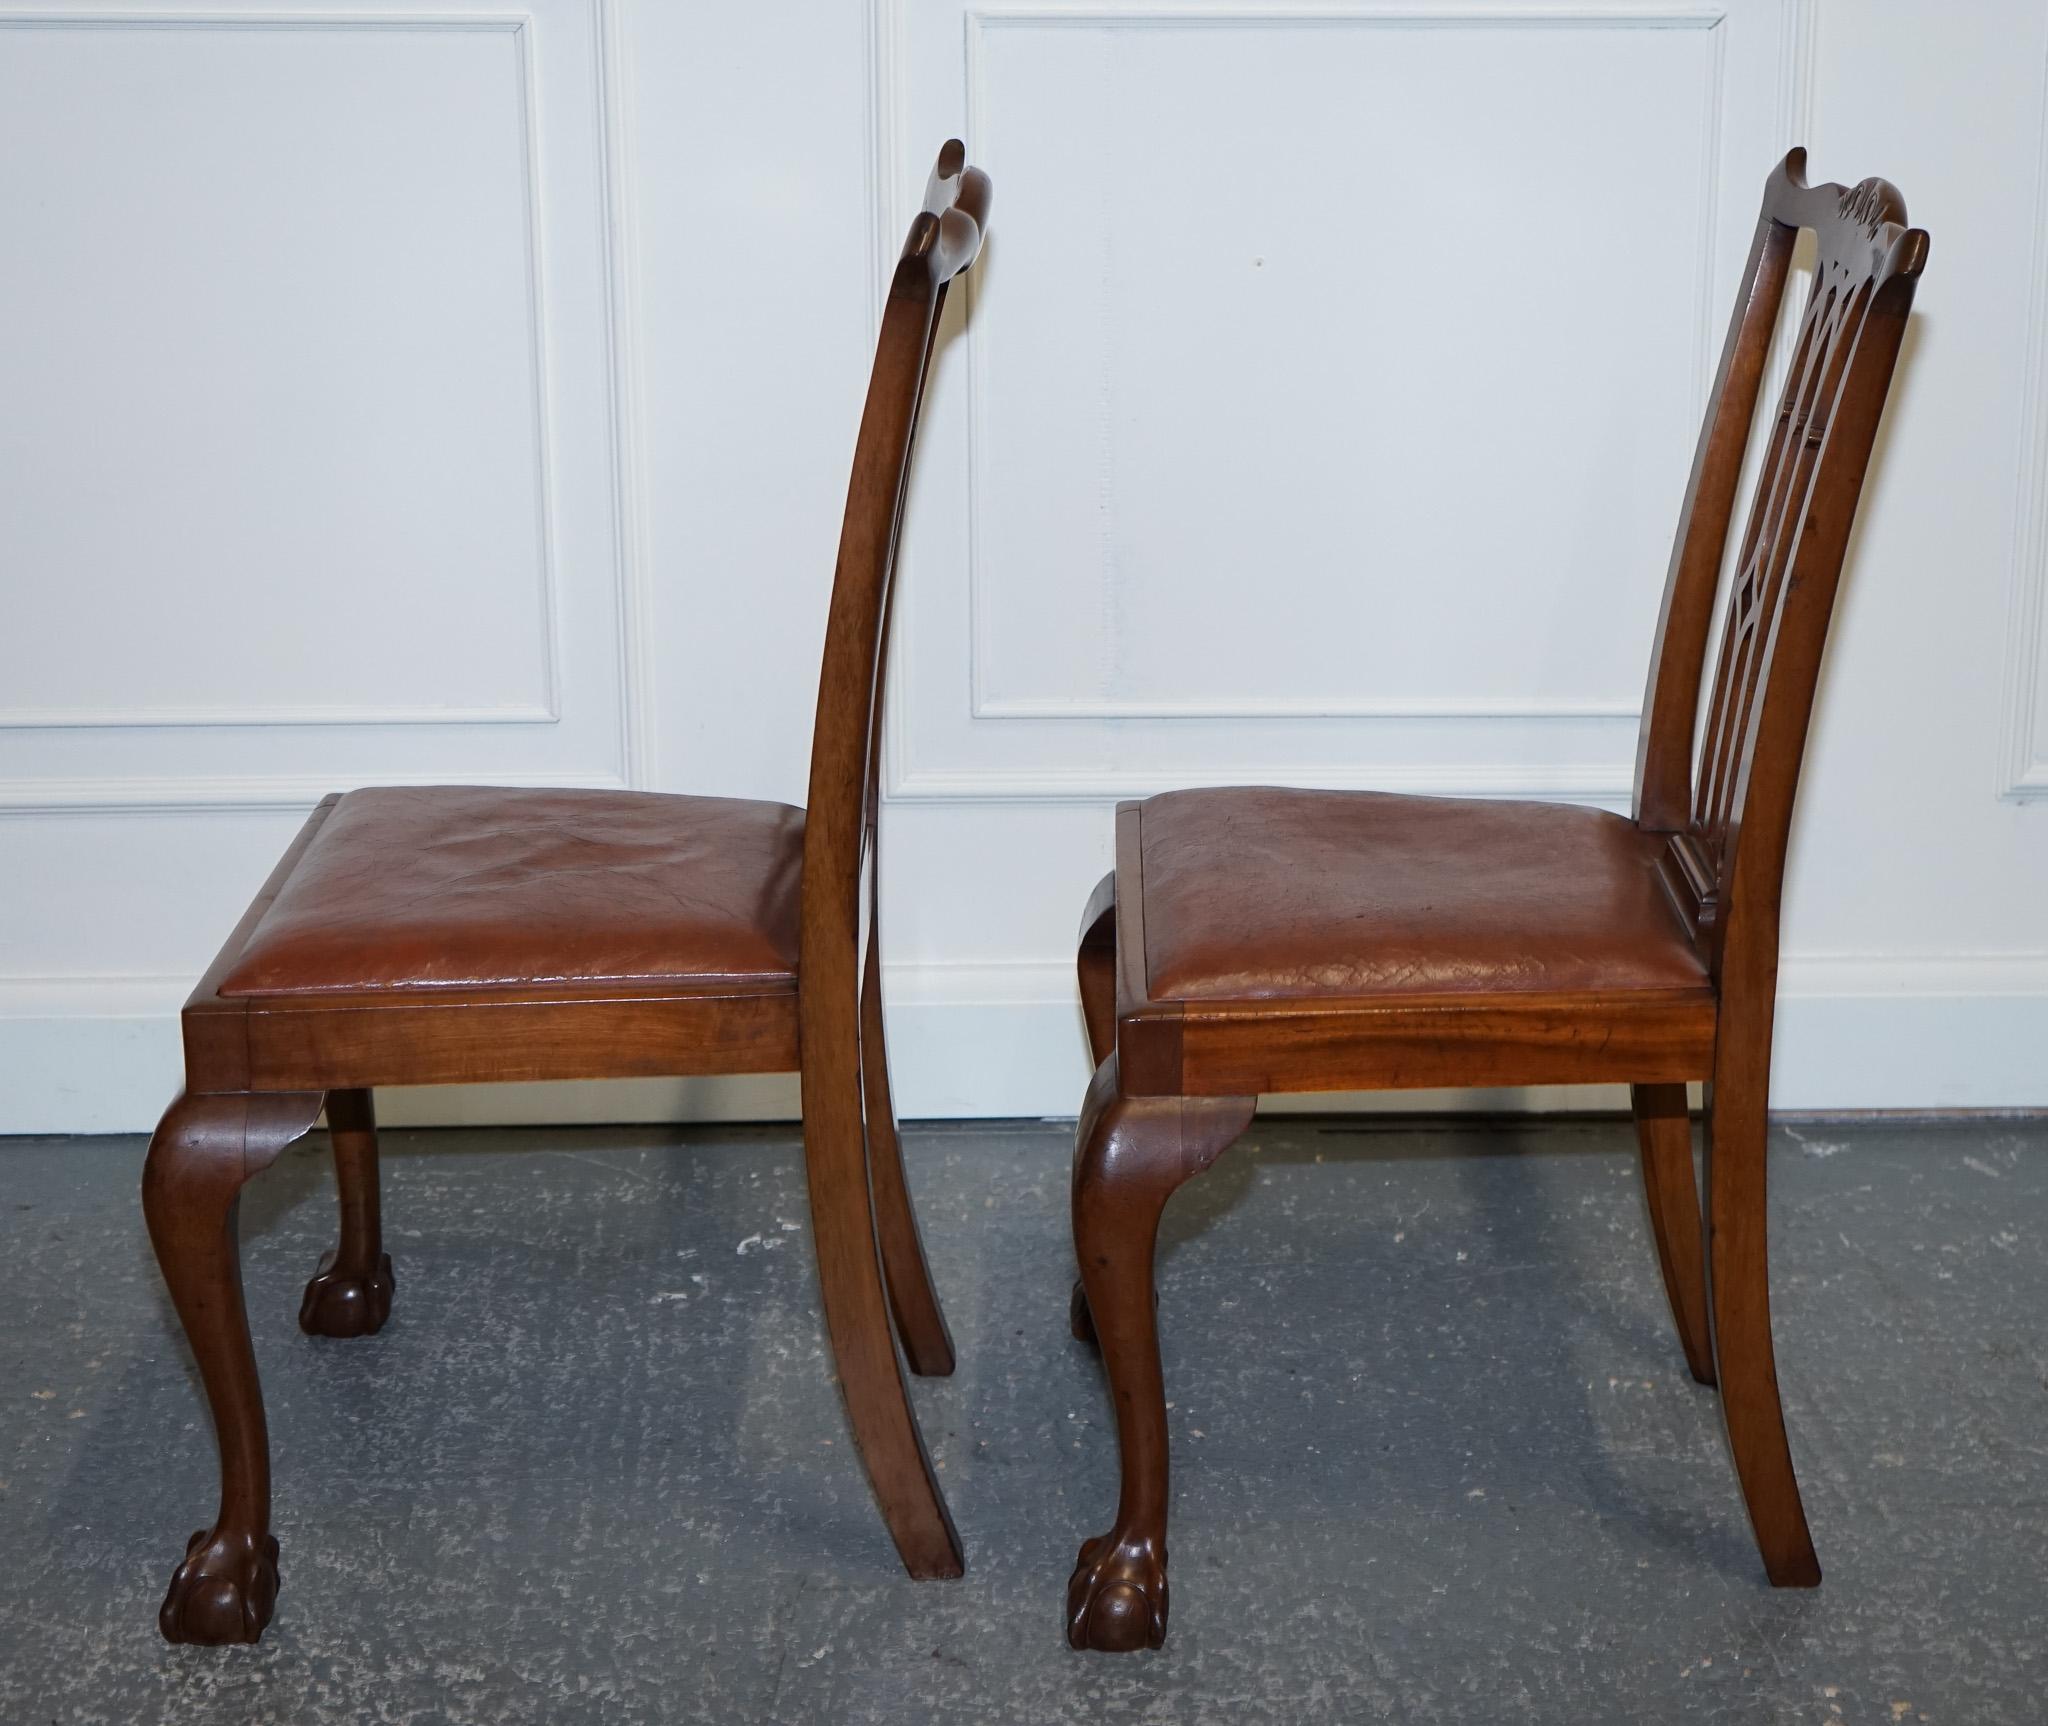 CHIPPENDALE STYLE 5 DINING CHAIRS WiTH LEATHER SEATS PERFECT FOR ROUND TABLE In Good Condition For Sale In Pulborough, GB